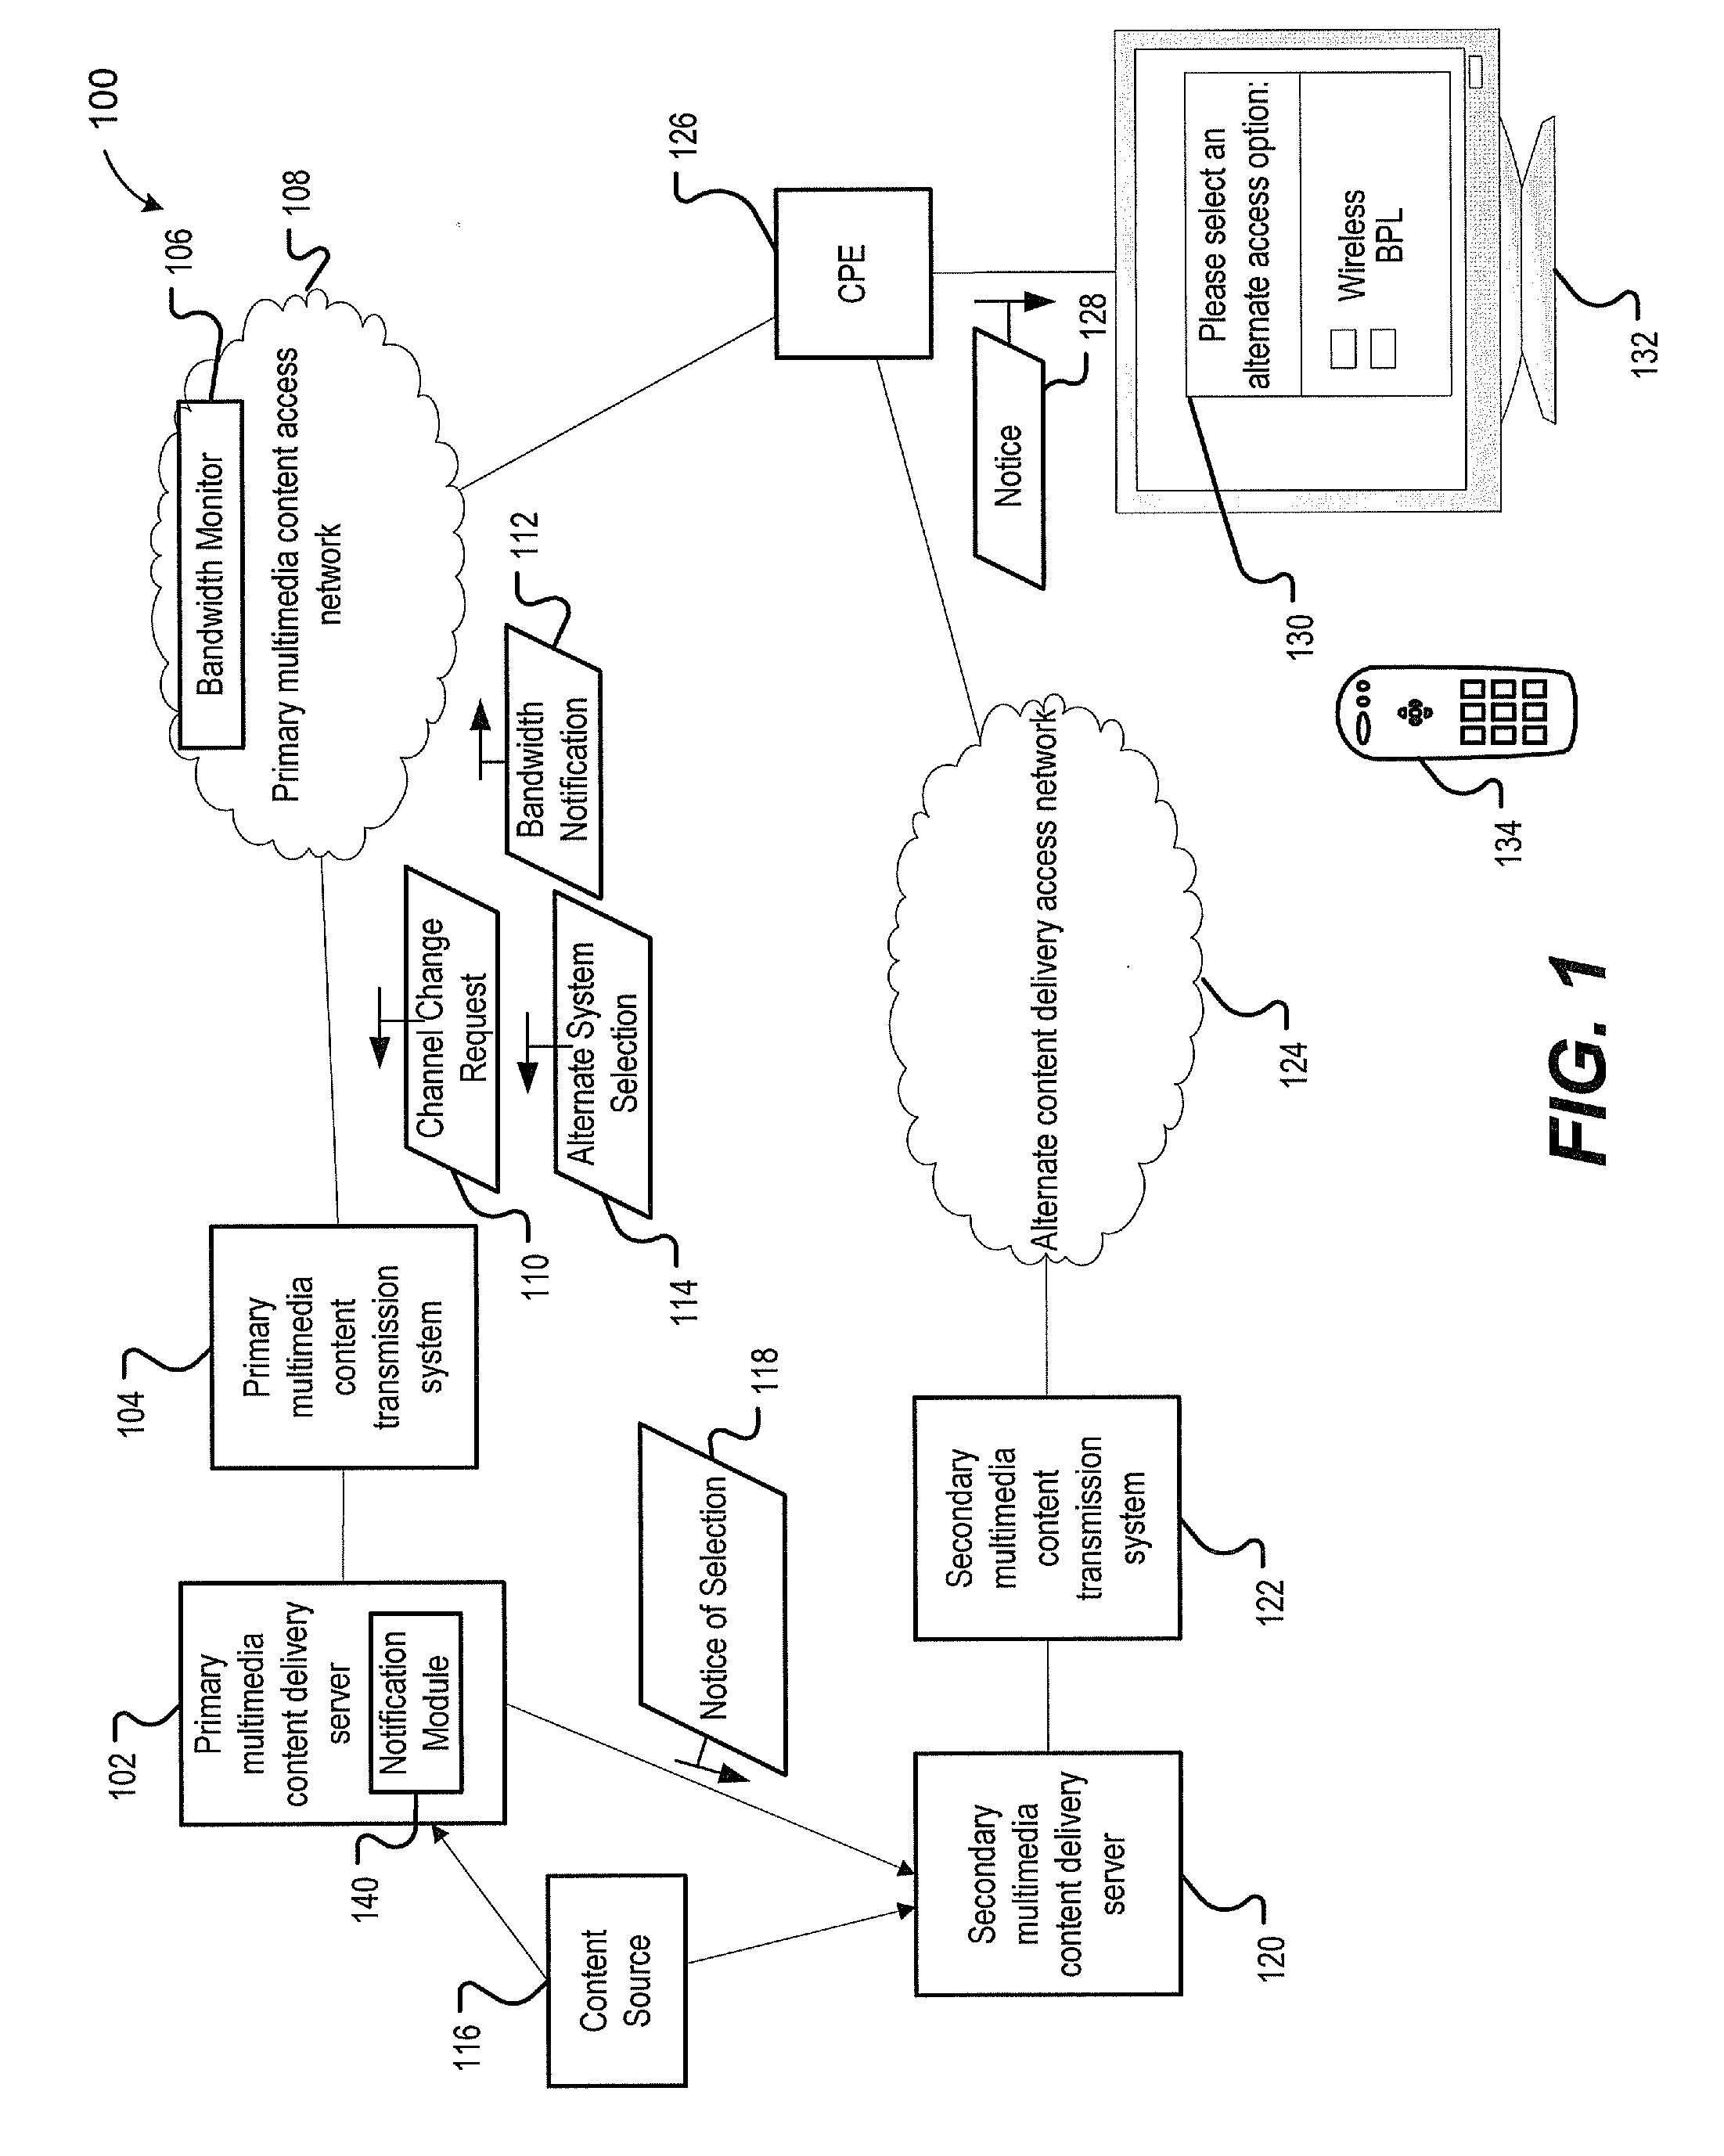 Channel Change Via An Alternate Multimedia Content Delivery System